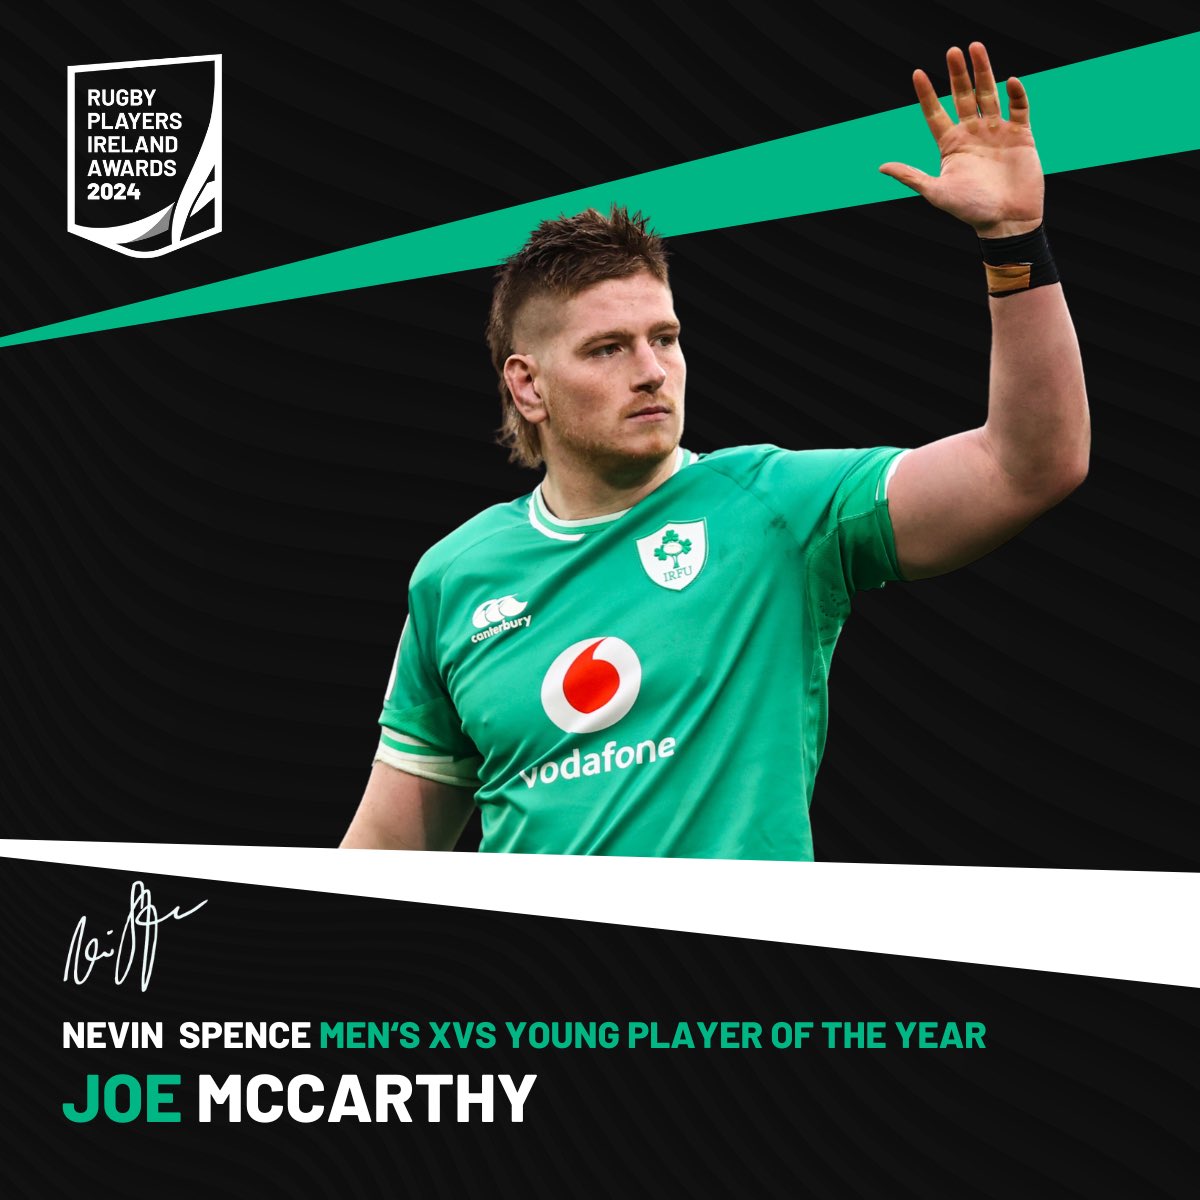 ⭐️ Joe McCarthy ⭐️ Big Joe has been a colossus for both @leinsterrugby & @IrishRugby this season. He becomes the latest talent to be awarded the Nevin Spence Men’s XVs Young Player of the Year 🏅 #MoreThanAPlayer #RugbyAwards24 #AlwaysWithUs